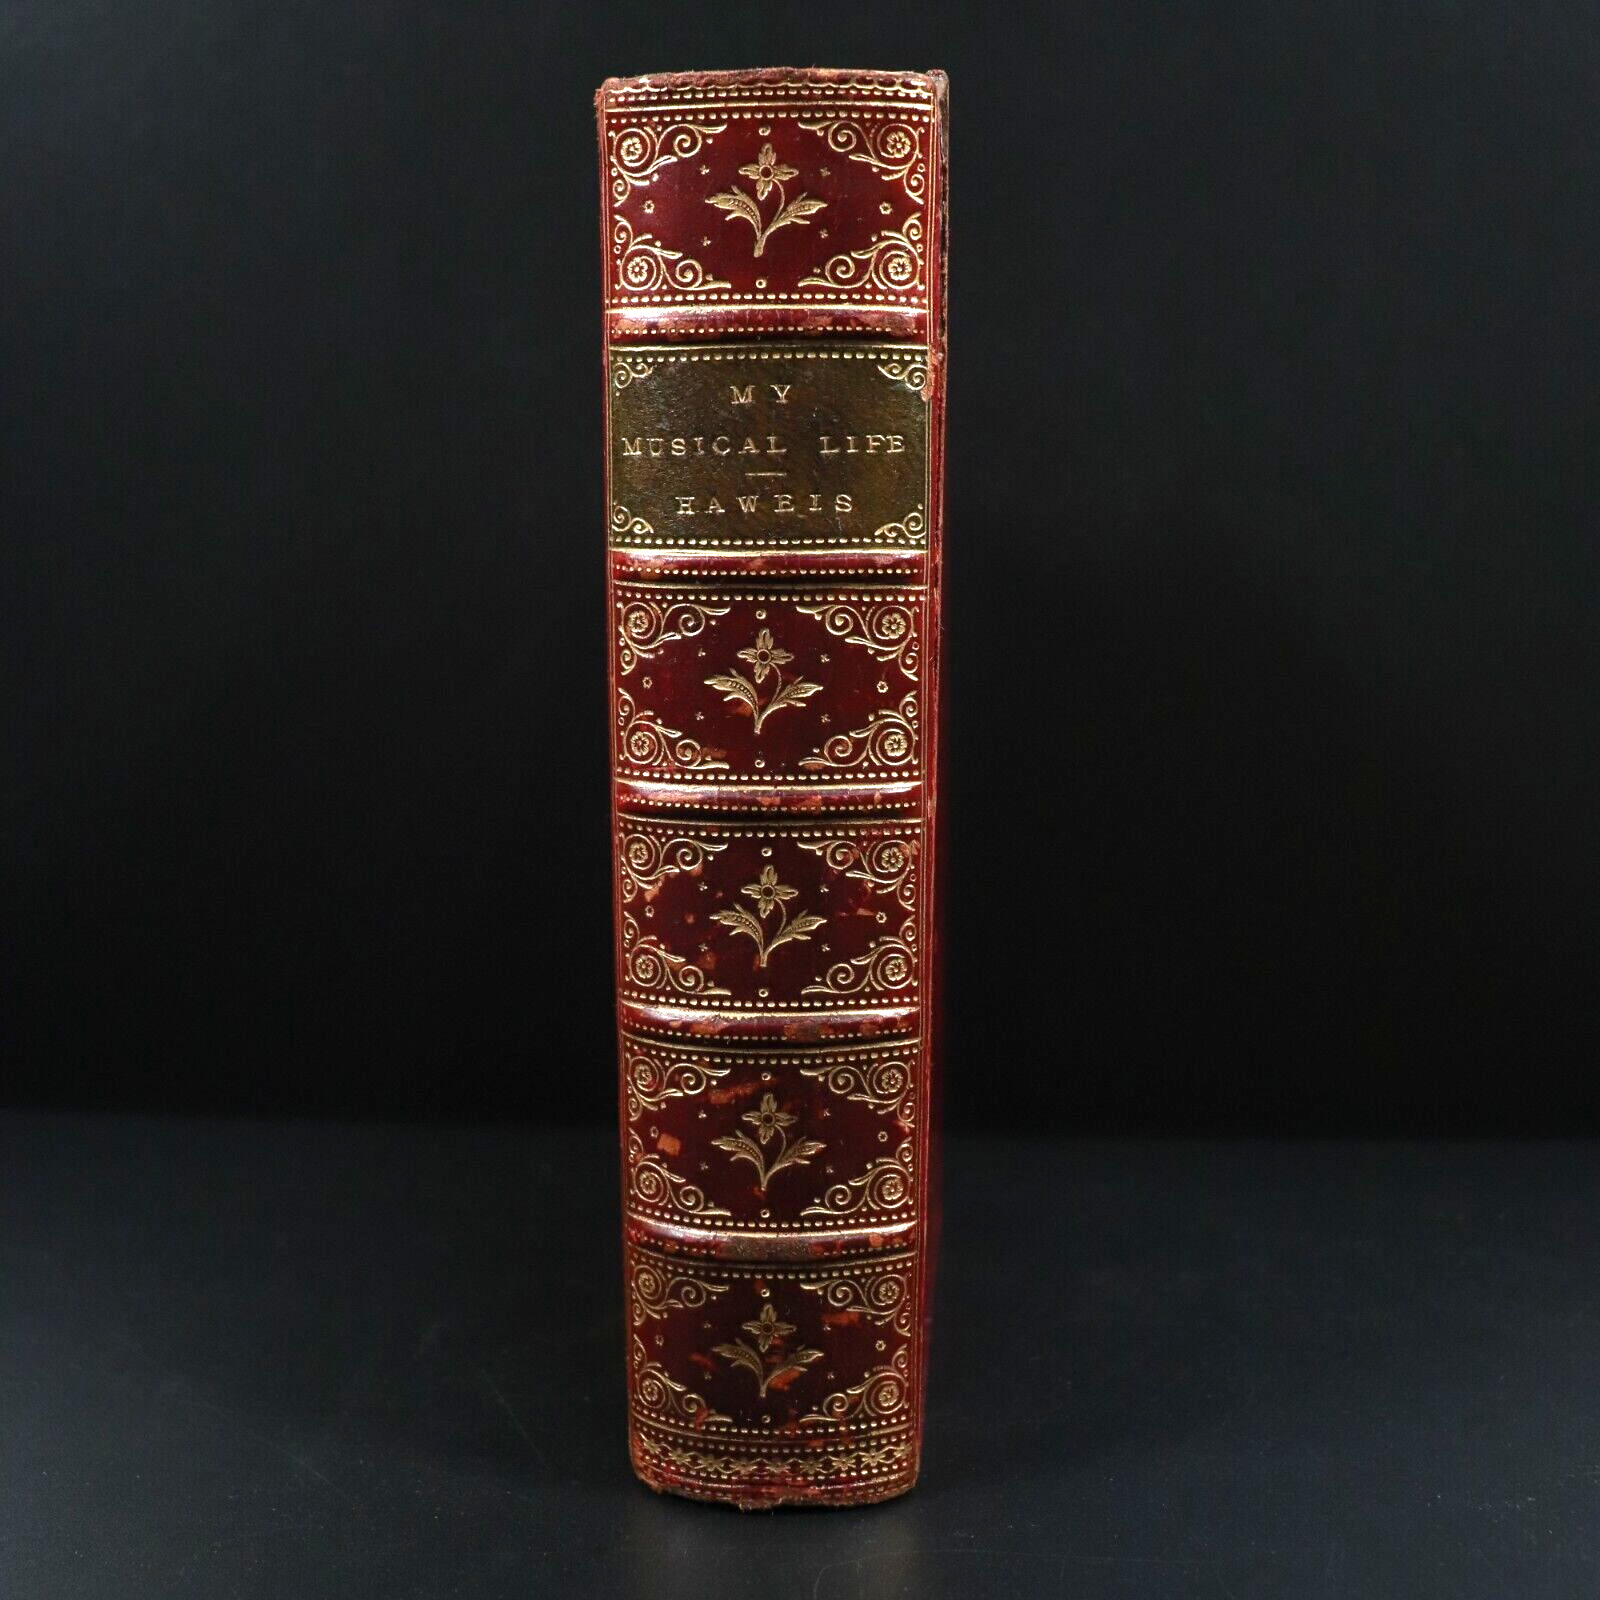 1888 My Musical Life by H.R. Haweis Antiquarian Music History Book Fine Binding